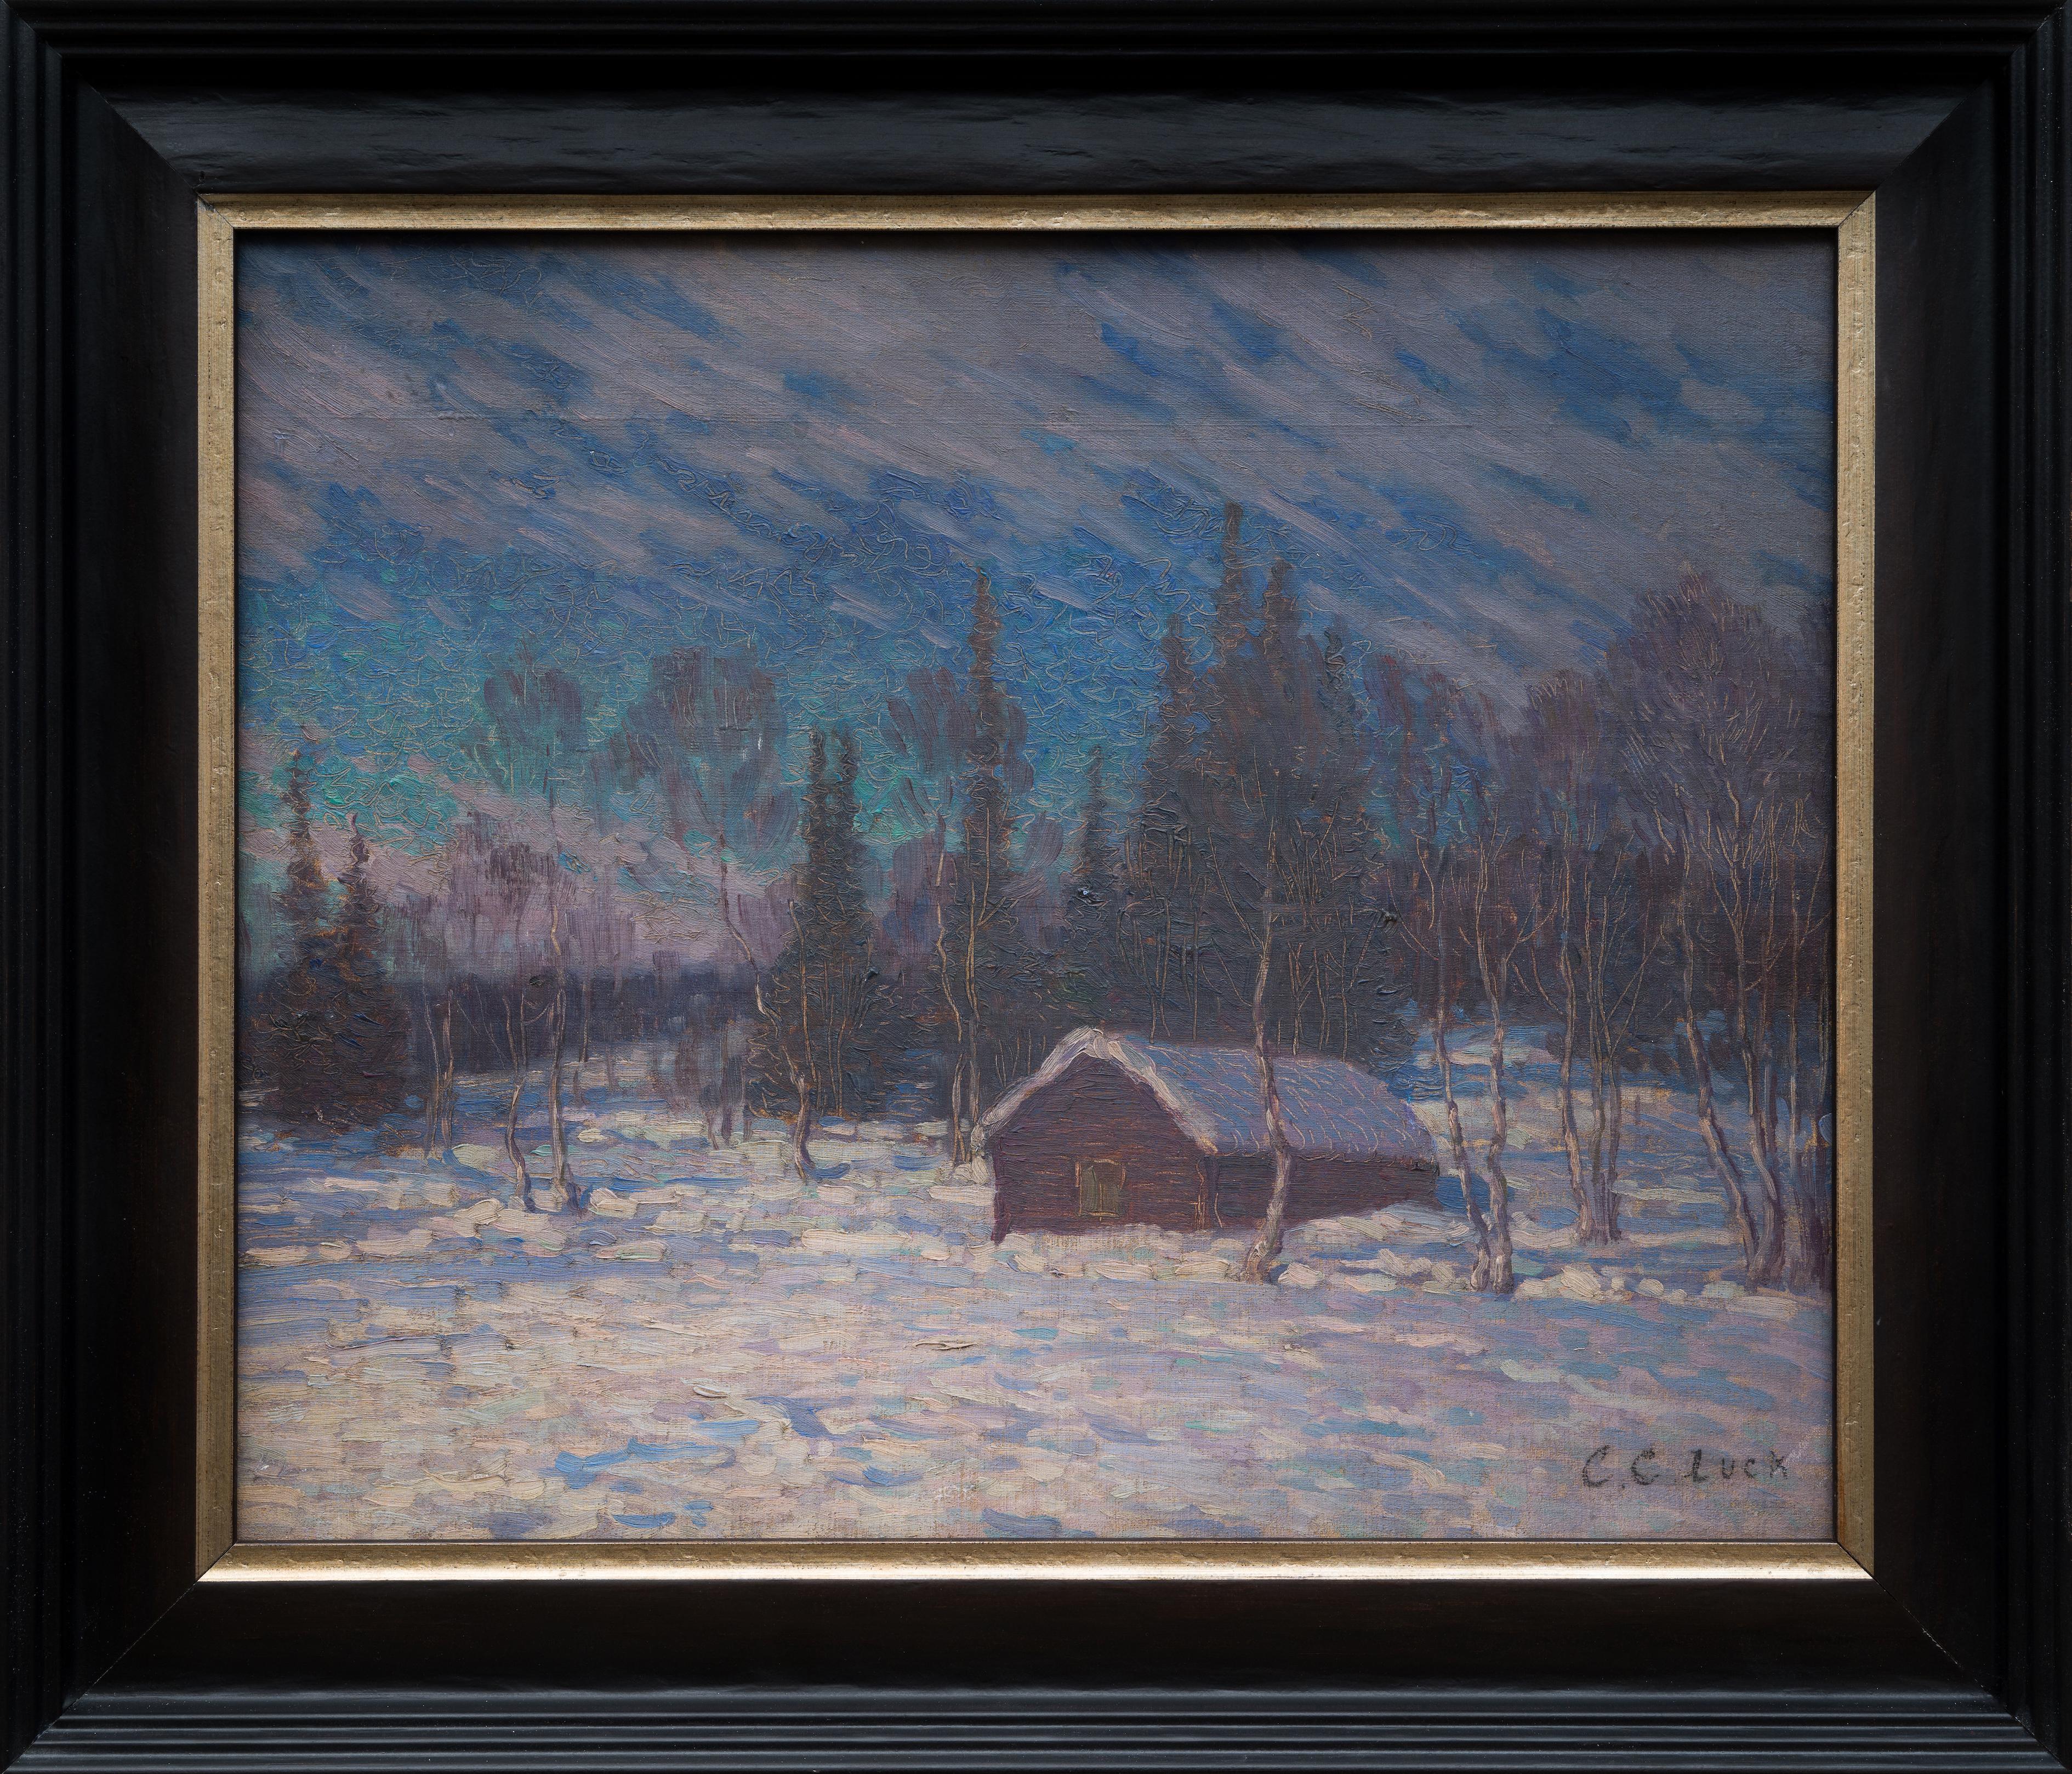 Winter Twilight by Cornwall Artist Charles Cardale Luck, Oil on Board 